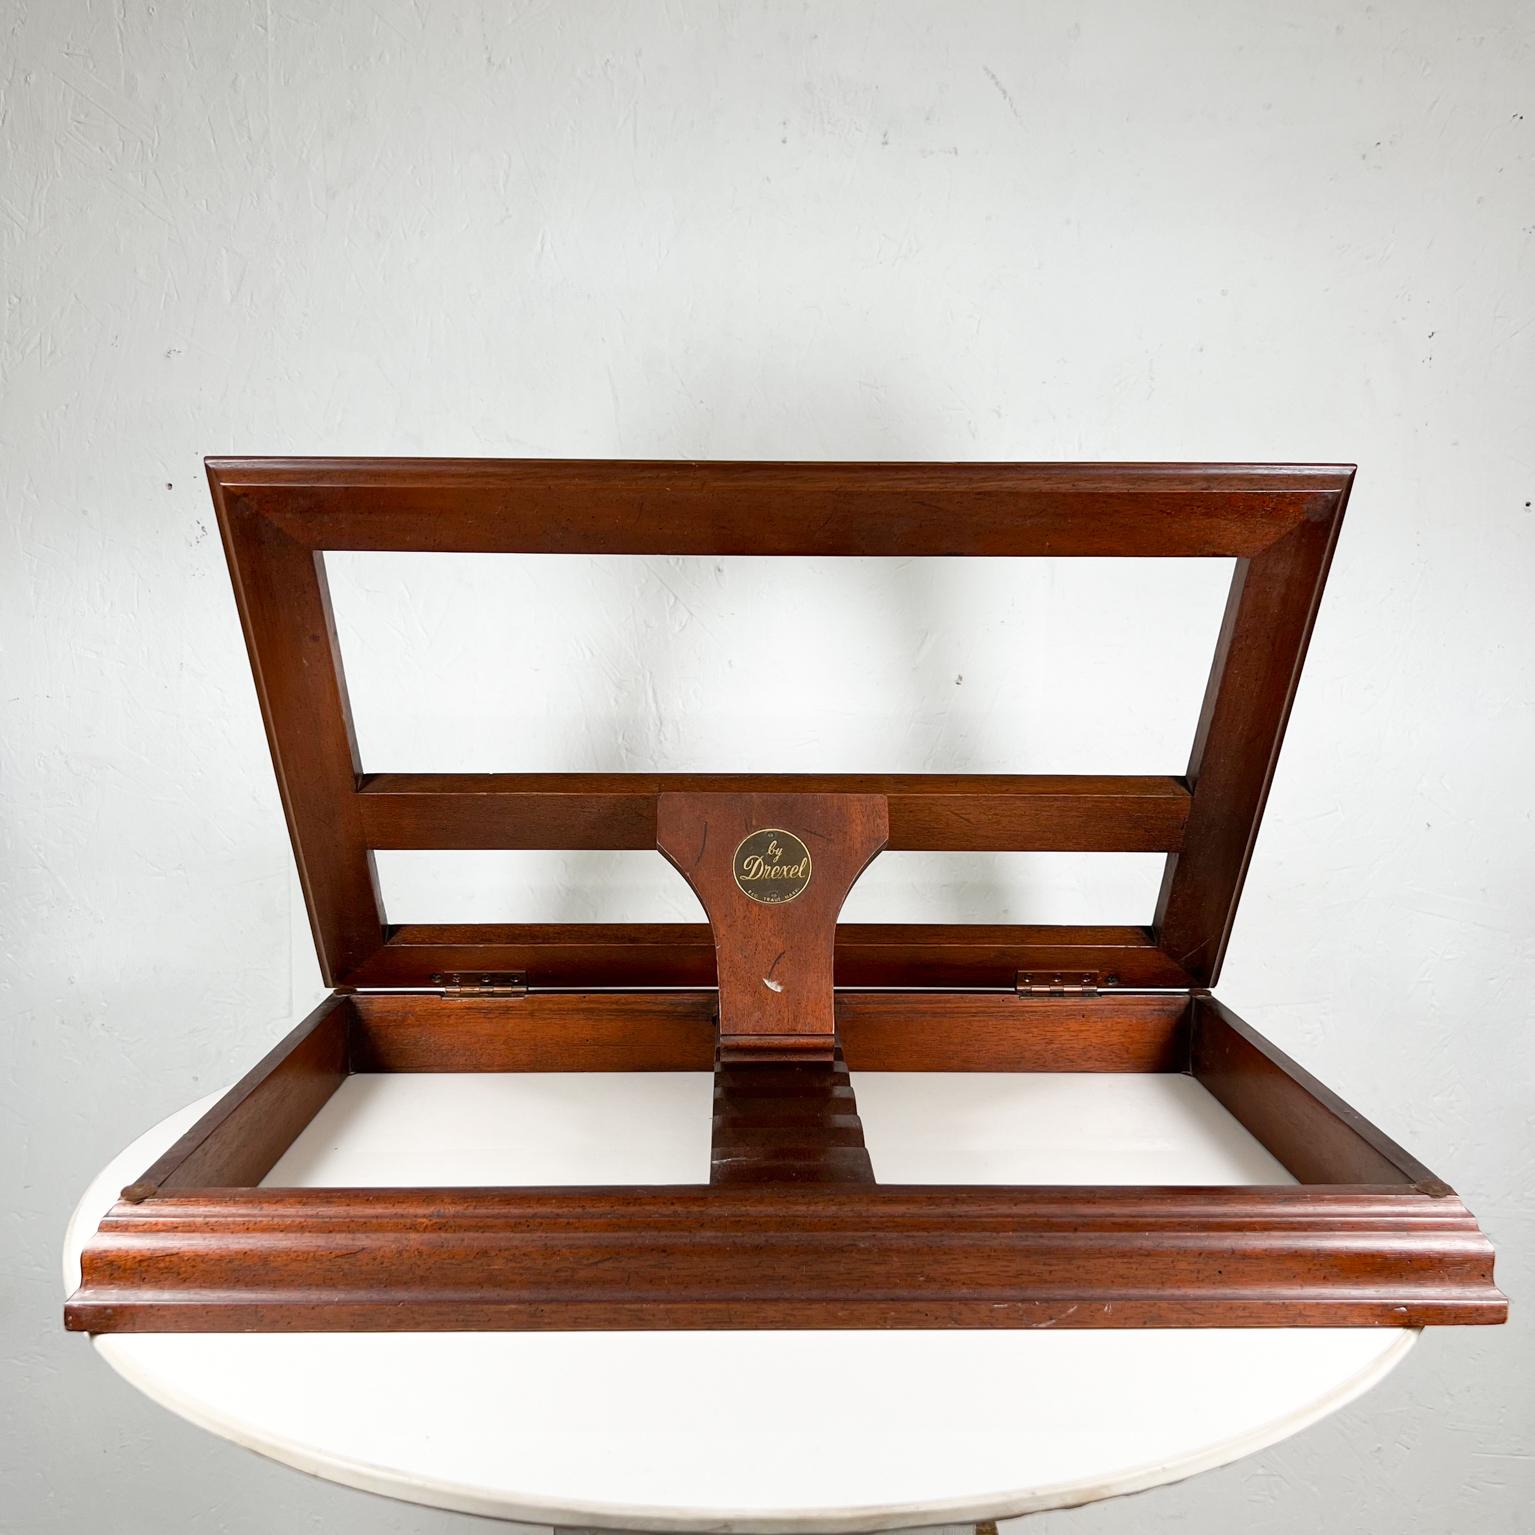 MCM by Drexel book holder wood frame
Measures: 20.18 W x 13 D x 2.38, closed Open 12.5 tall
Unrestored original vintage condition. Wear to the finish.
See all images provided.

 